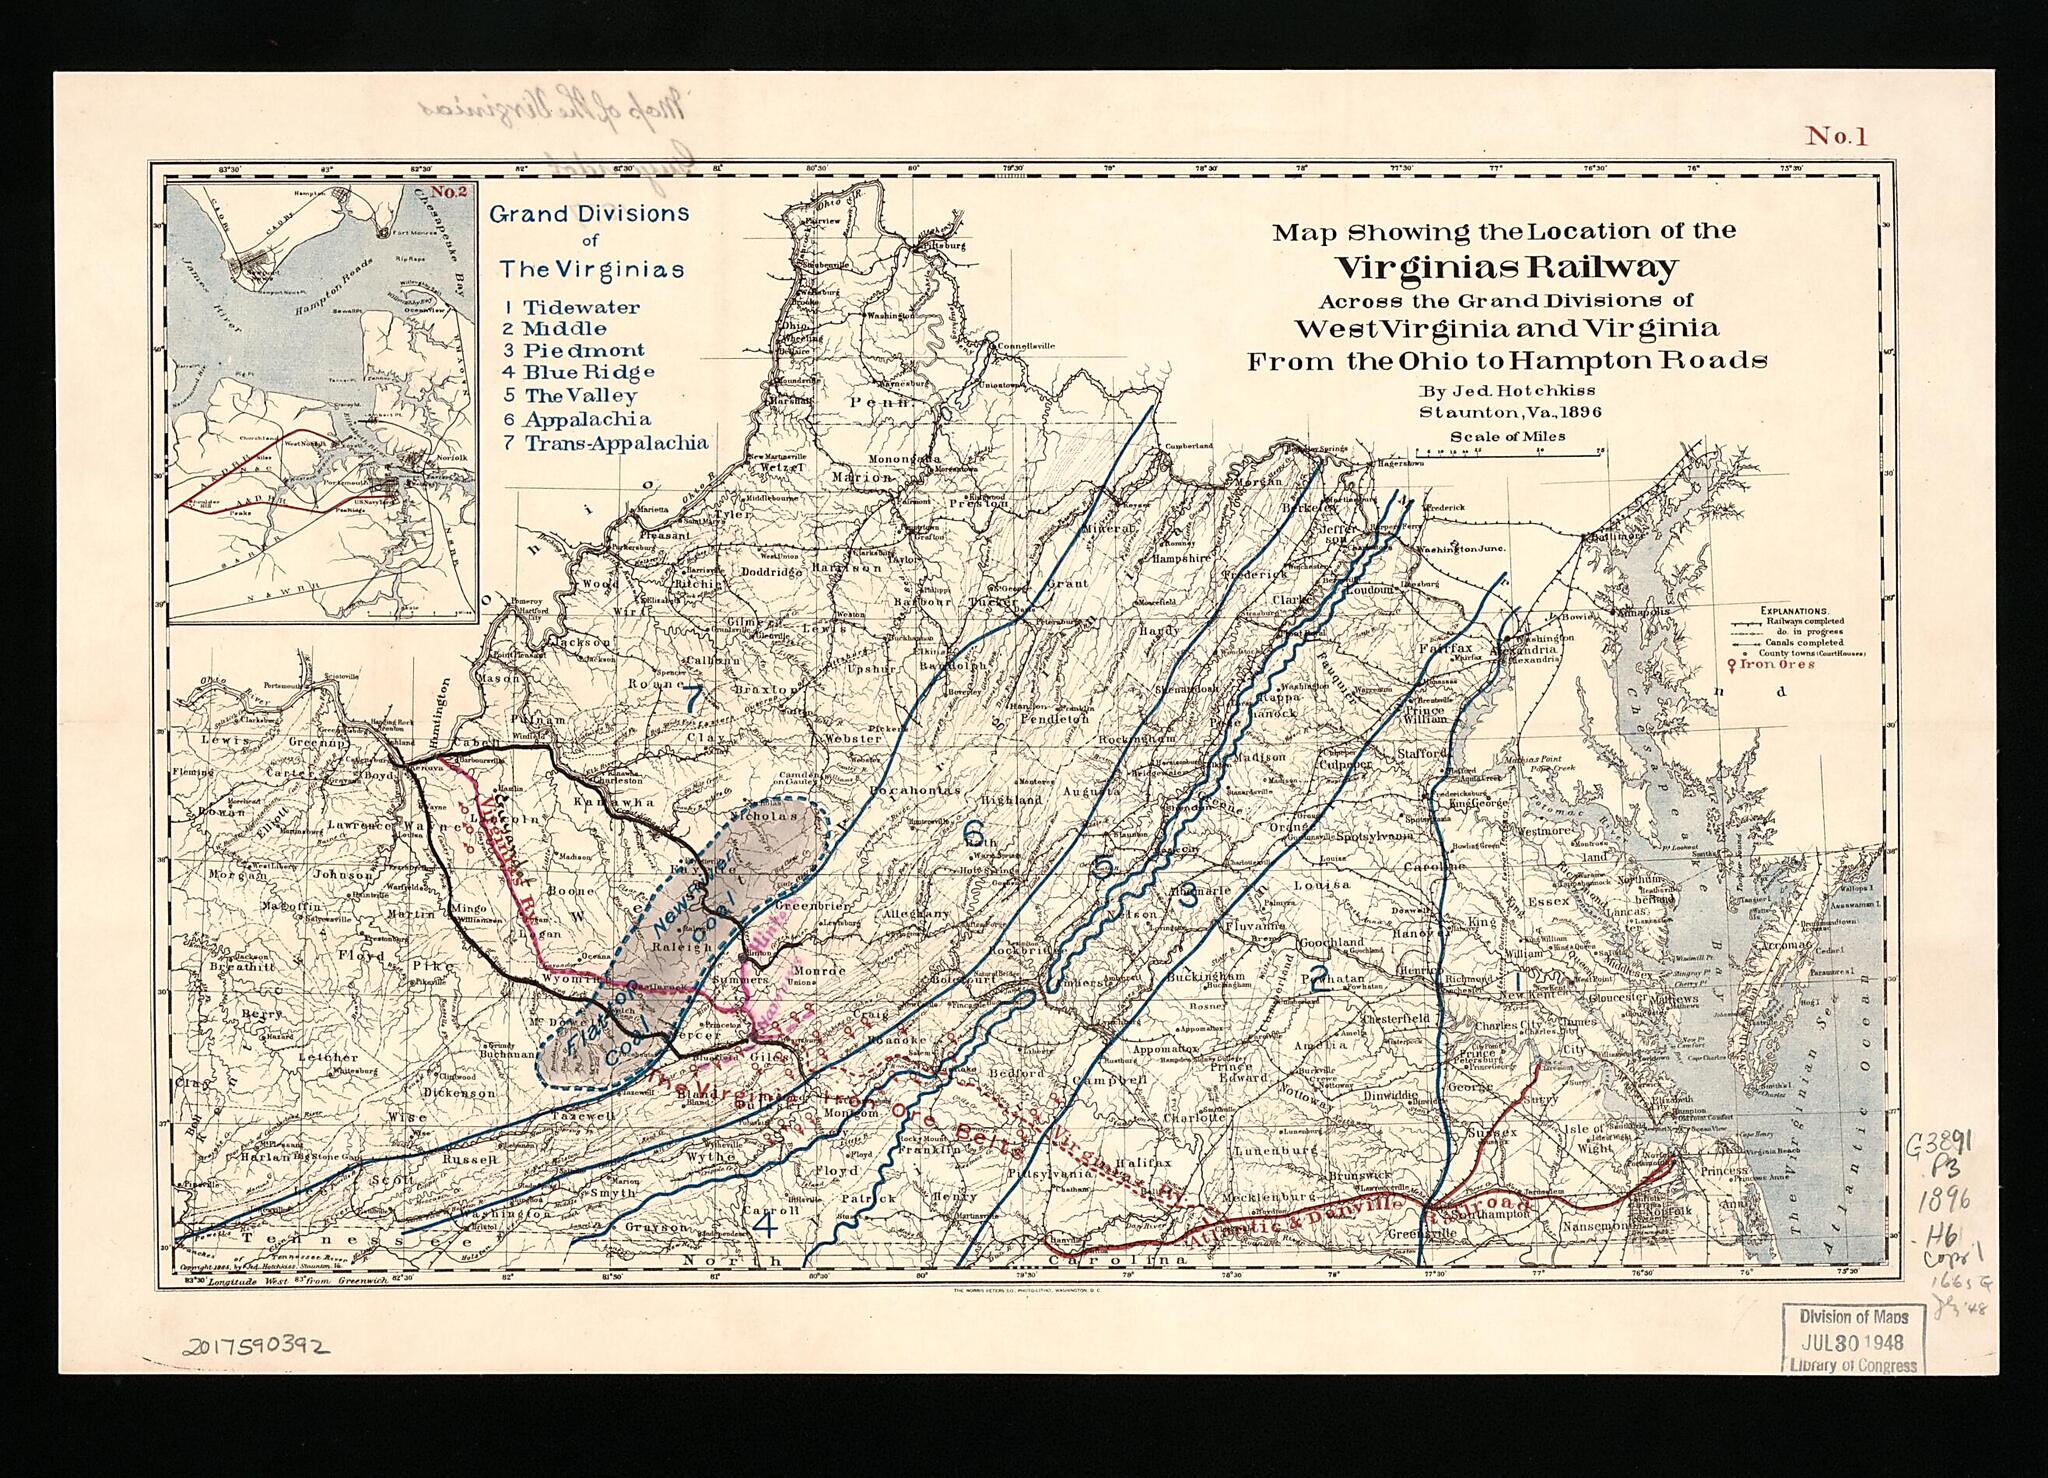 This old map of Map Showing the Location of the Virginias Railway Across the Grand Divisions of West Virginia and Virginia from the Ohio to Hampton Roads (Virginias Railway Across the Grand Divisions of West Virginia and Virginia from the Ohio to Hampton